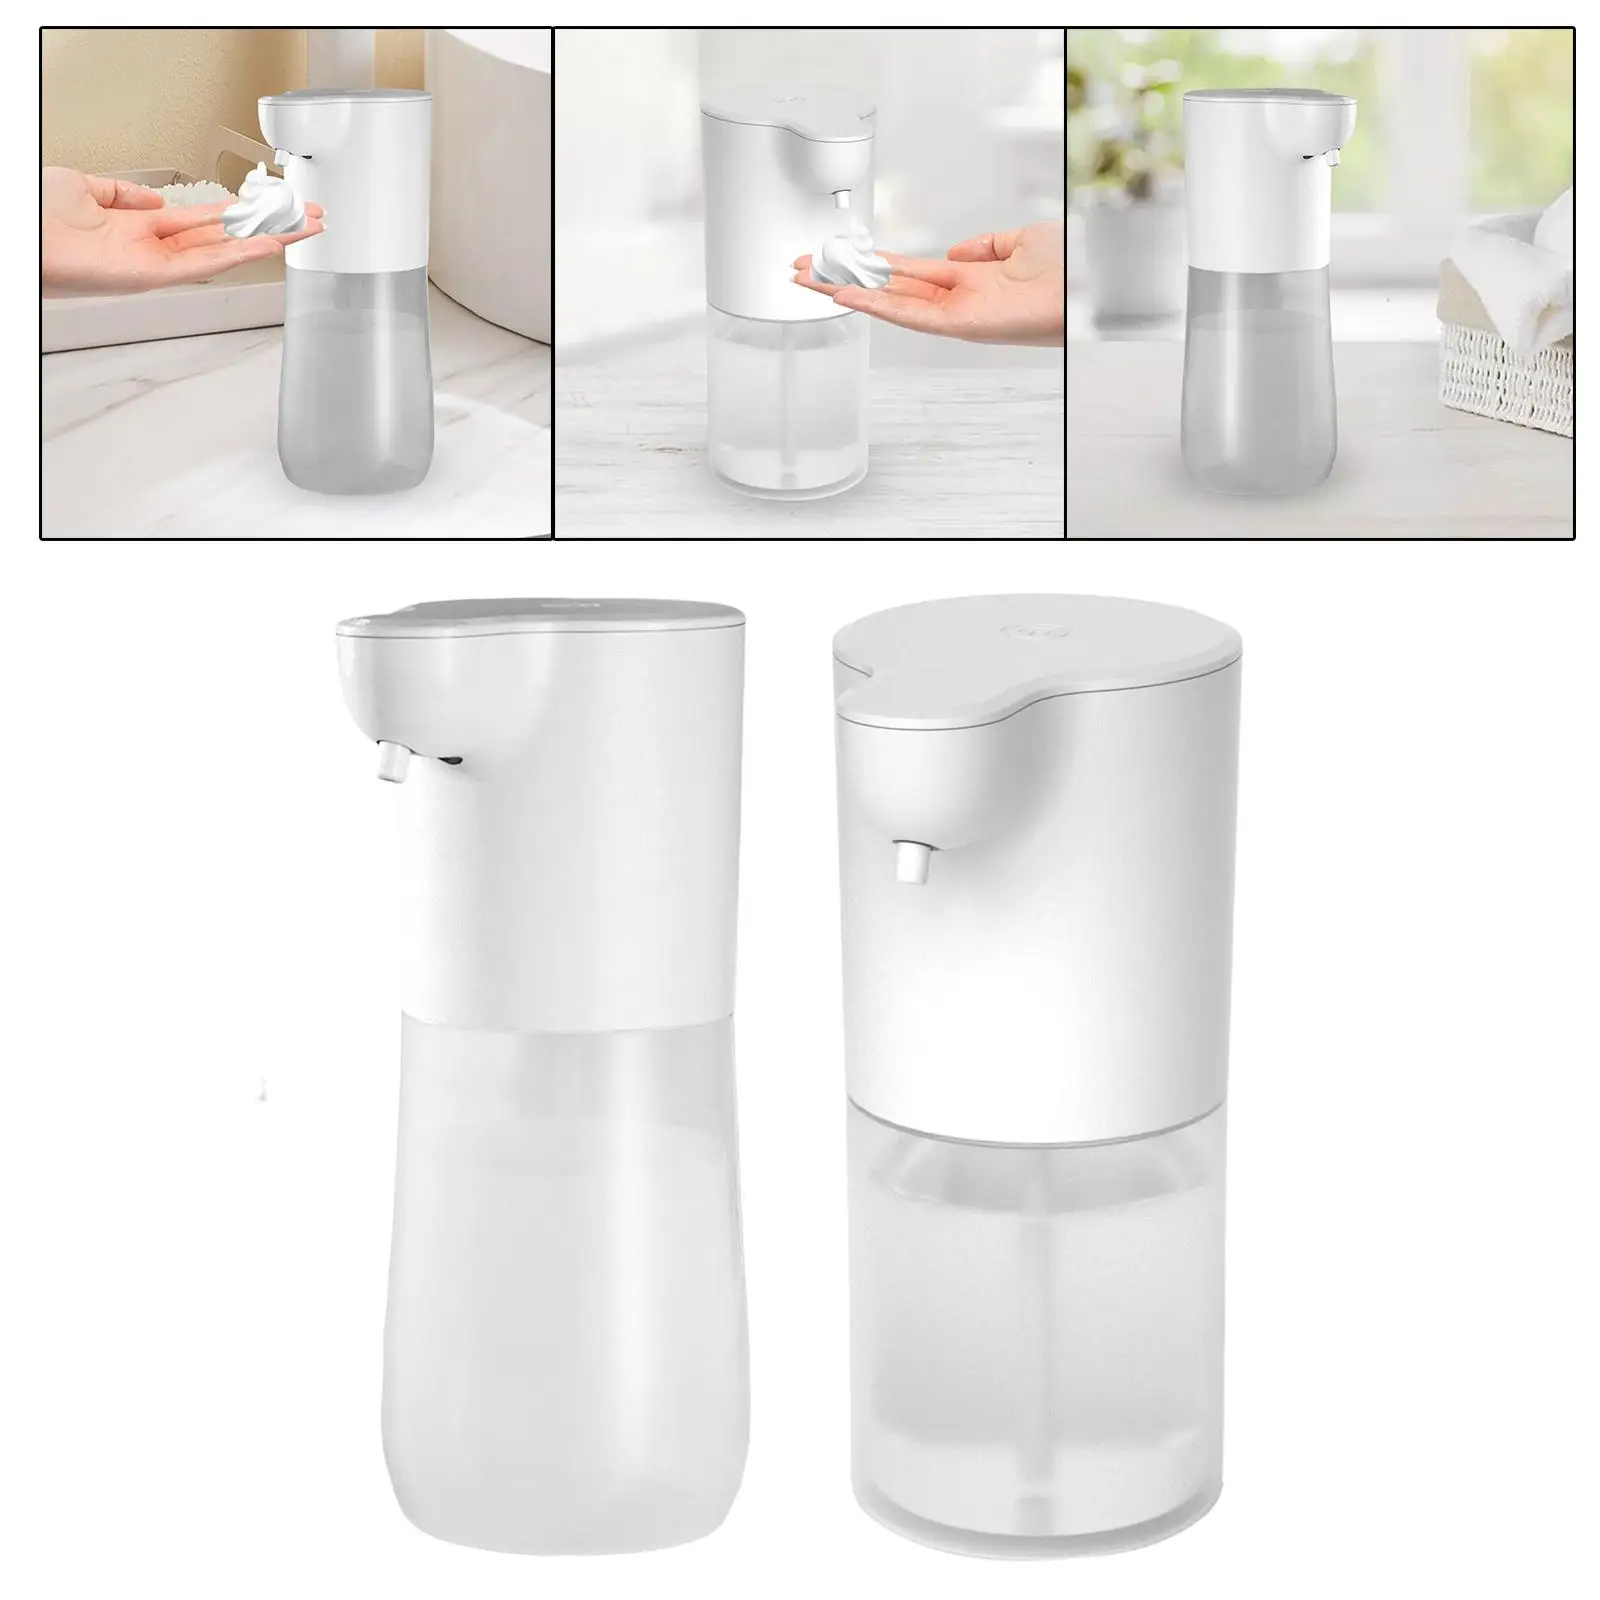 Four Gear Switch Automatic Soap Dispensers Hand Wash Waterproof Foaming Touchless Soap Dispensers for Washroom Countertop Kids